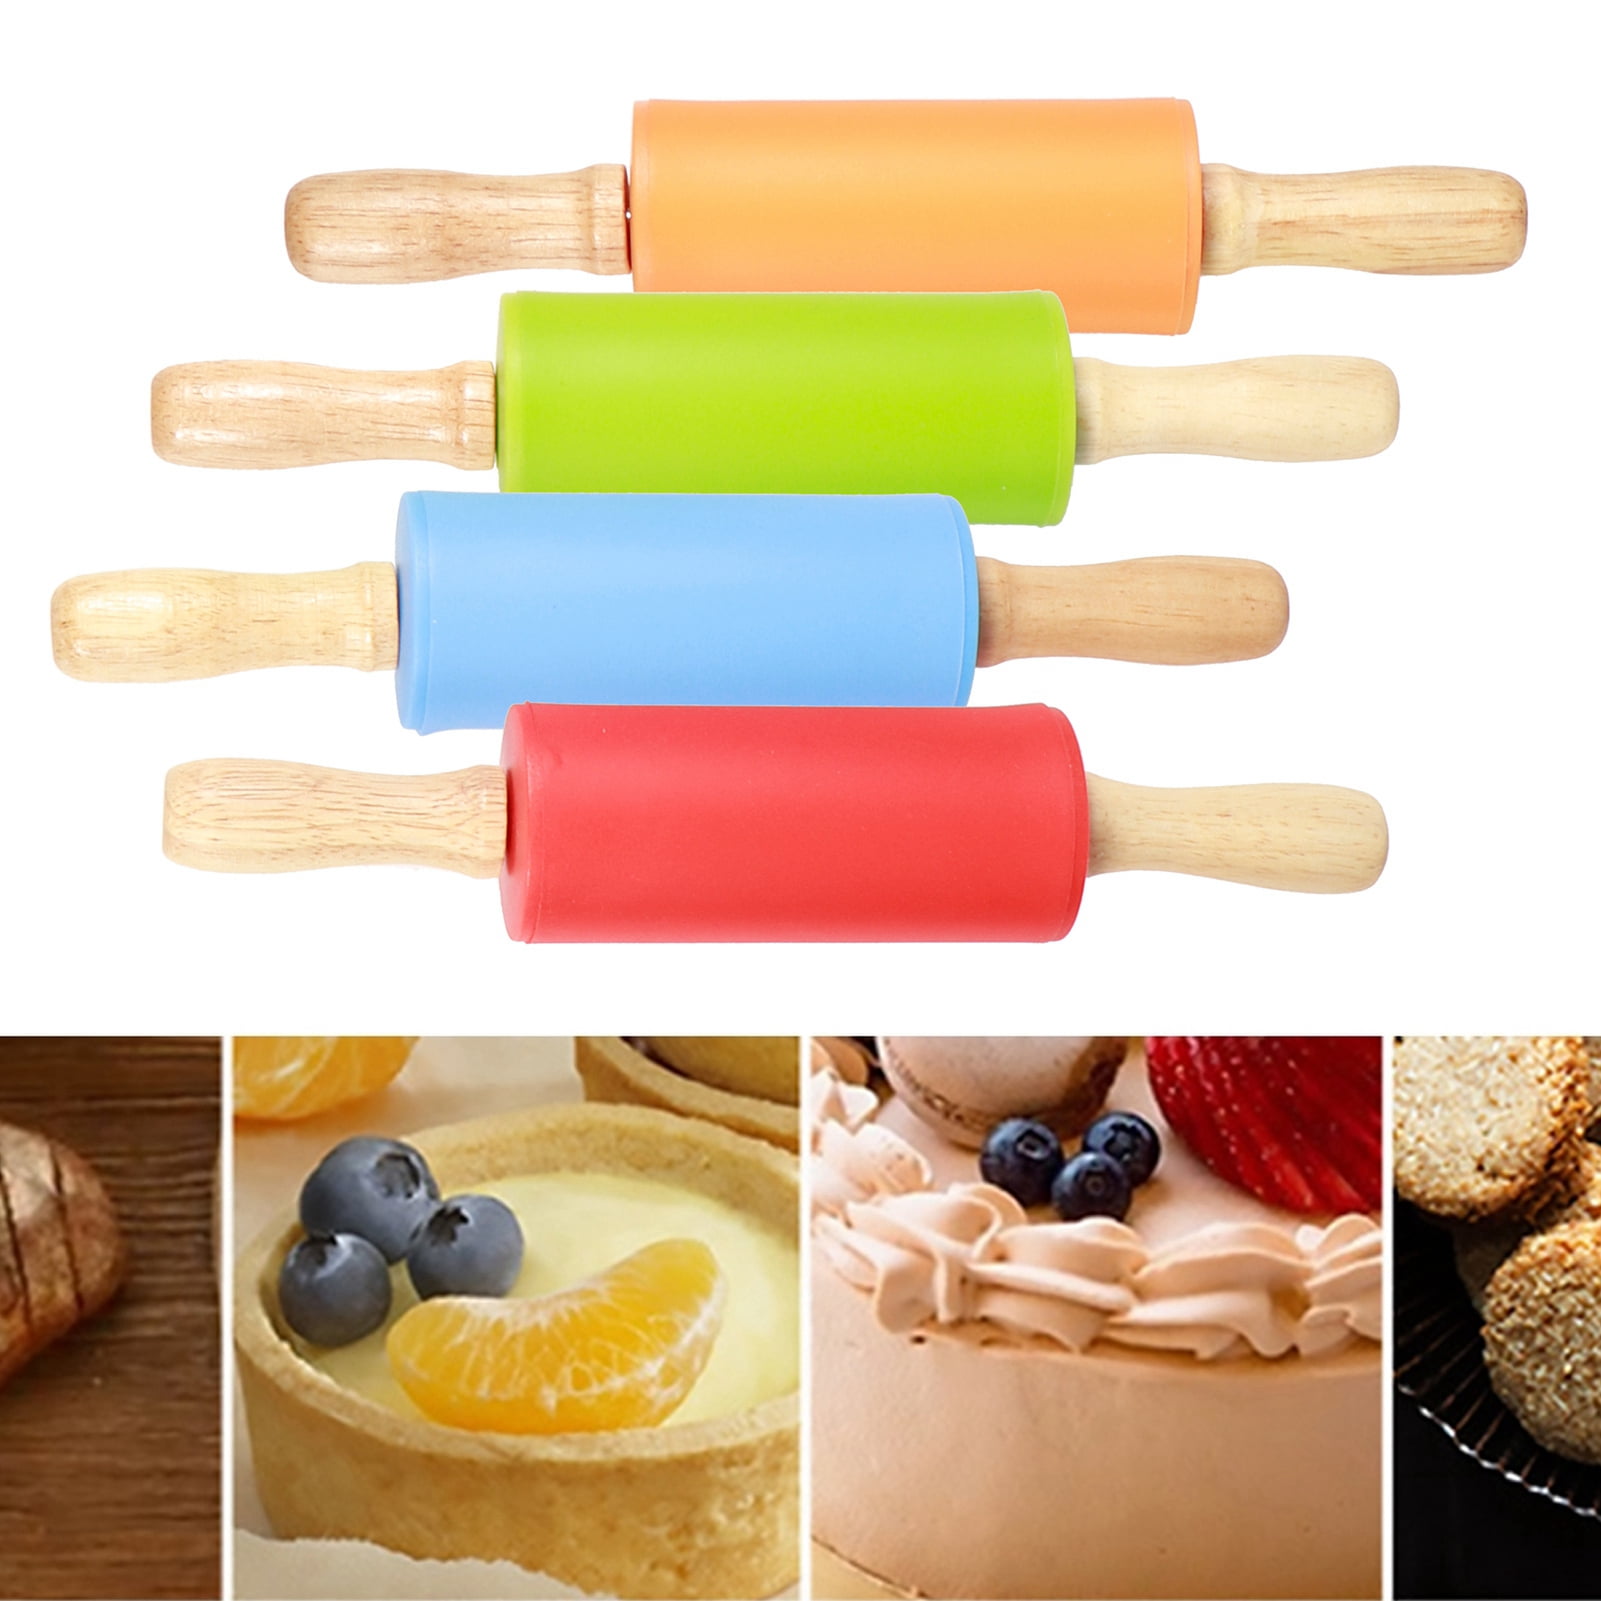 Details about   Cooking Cookie Dough Roller Pie Making Tools Kitchen Accessory Rolling Pins